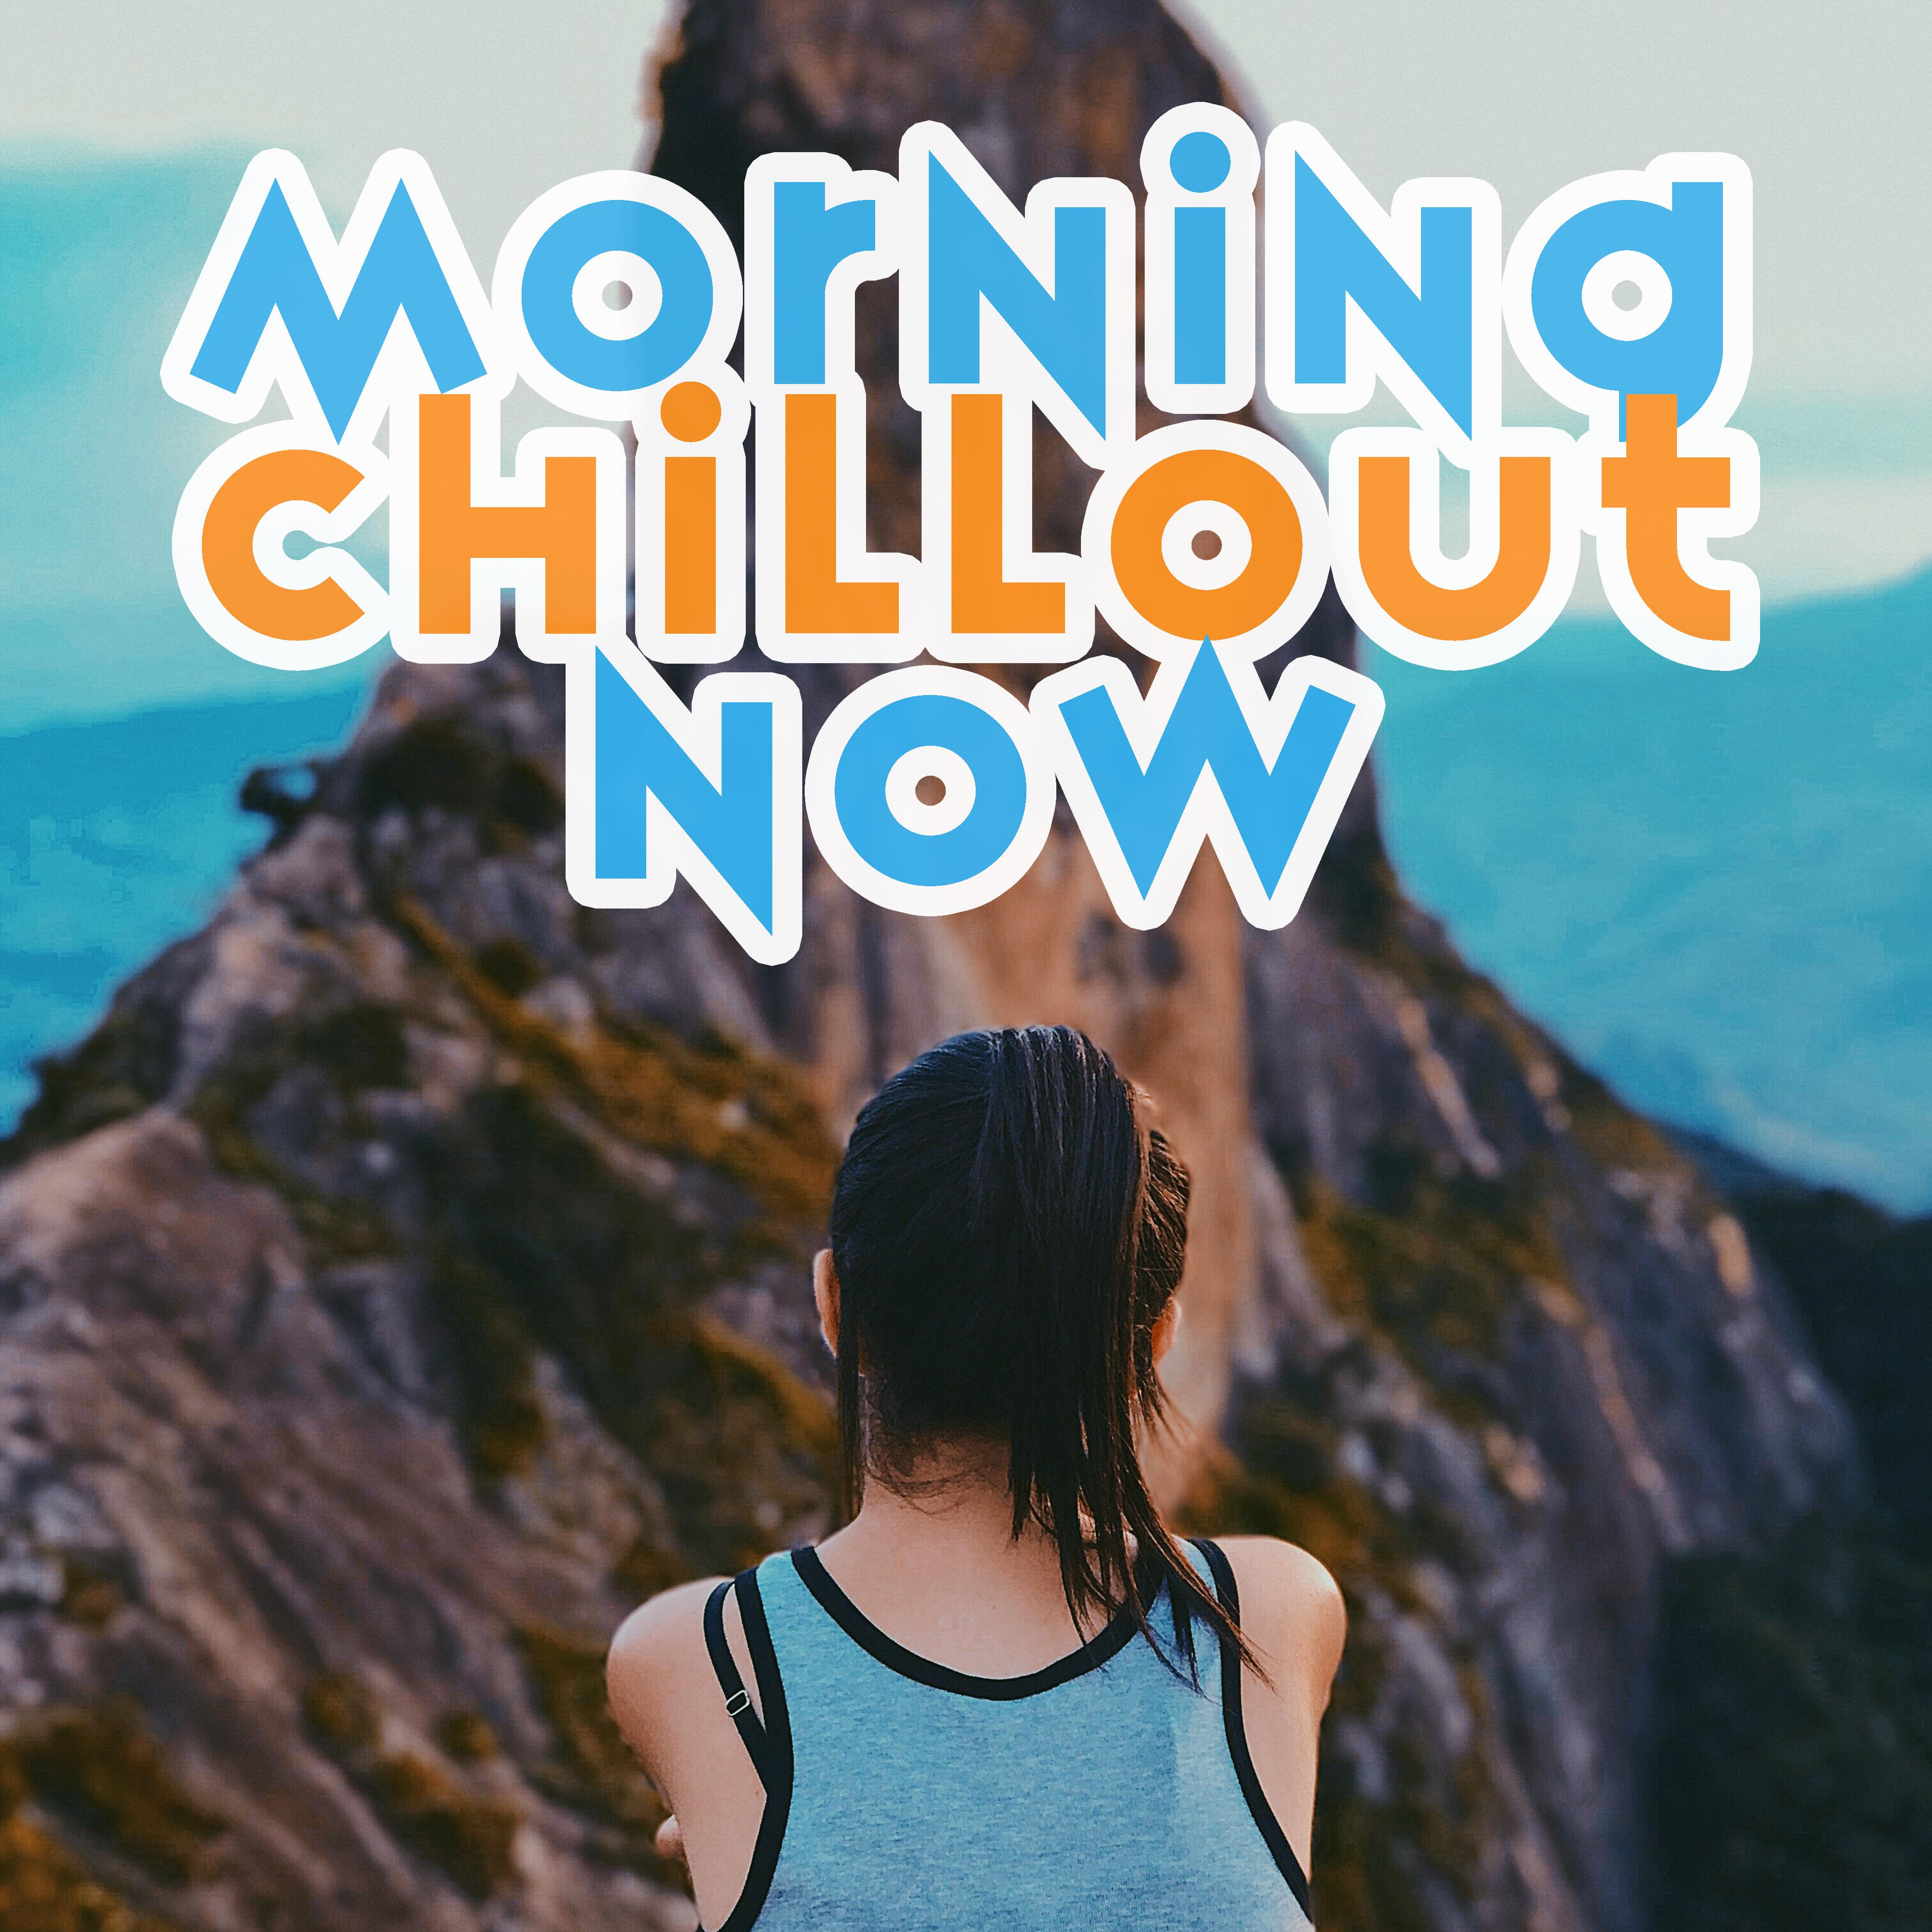 Morning Chillout Now – Relaxed Beats, Chill Out Music, Deep Electronic Vibes, Sunday Morning Chill